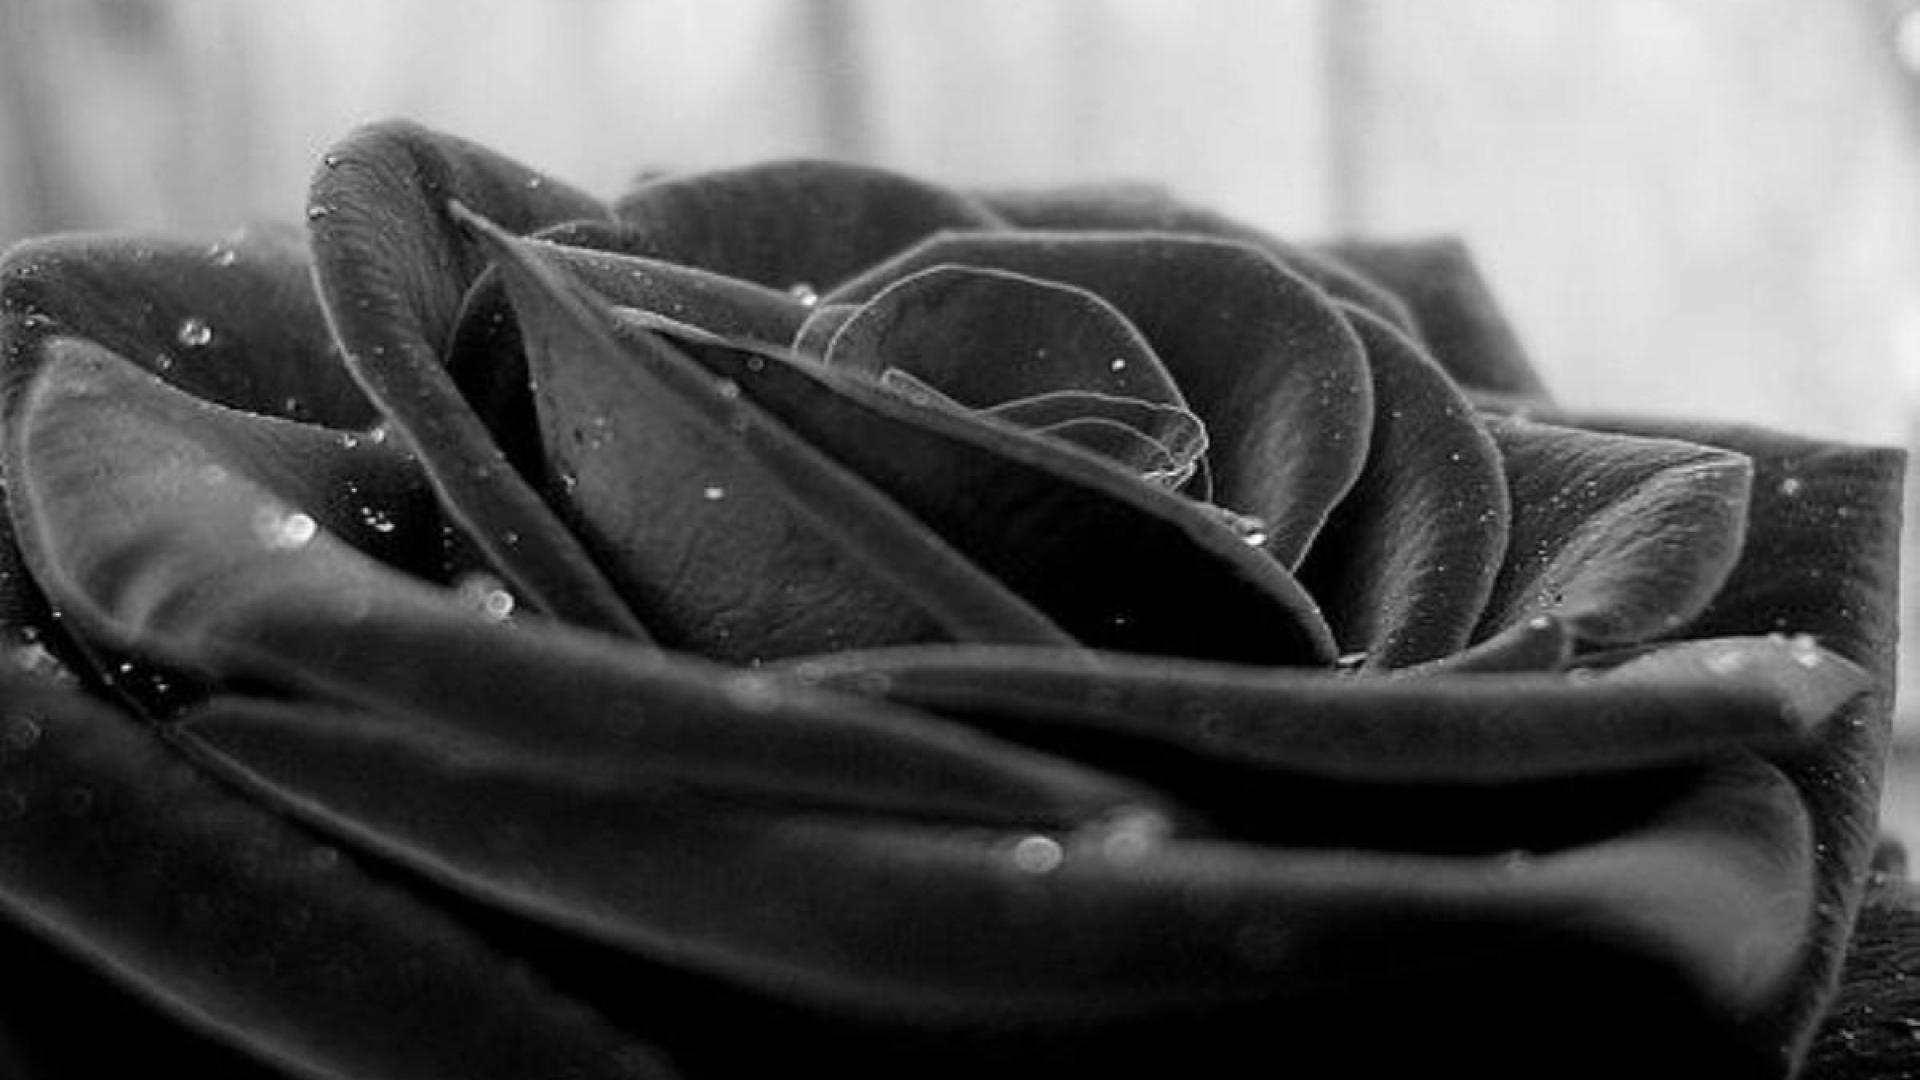 1920x1080 Wallpapers Of Black Roses Wallpapers) – HD Wallpapers